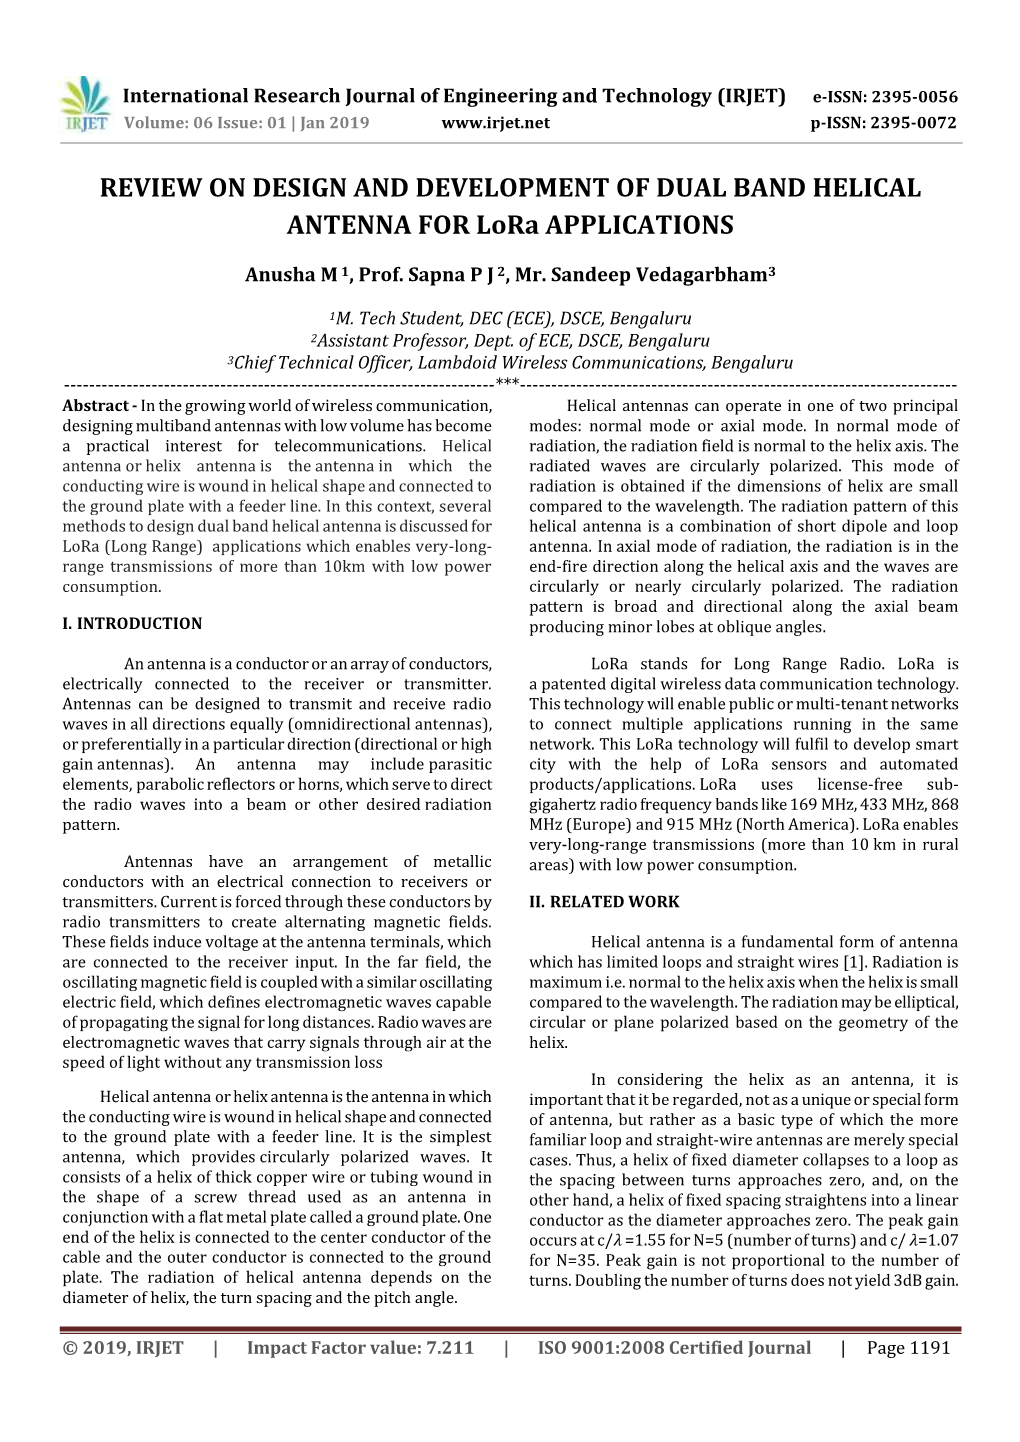 REVIEW on DESIGN and DEVELOPMENT of DUAL BAND HELICAL ANTENNA for Lora APPLICATIONS